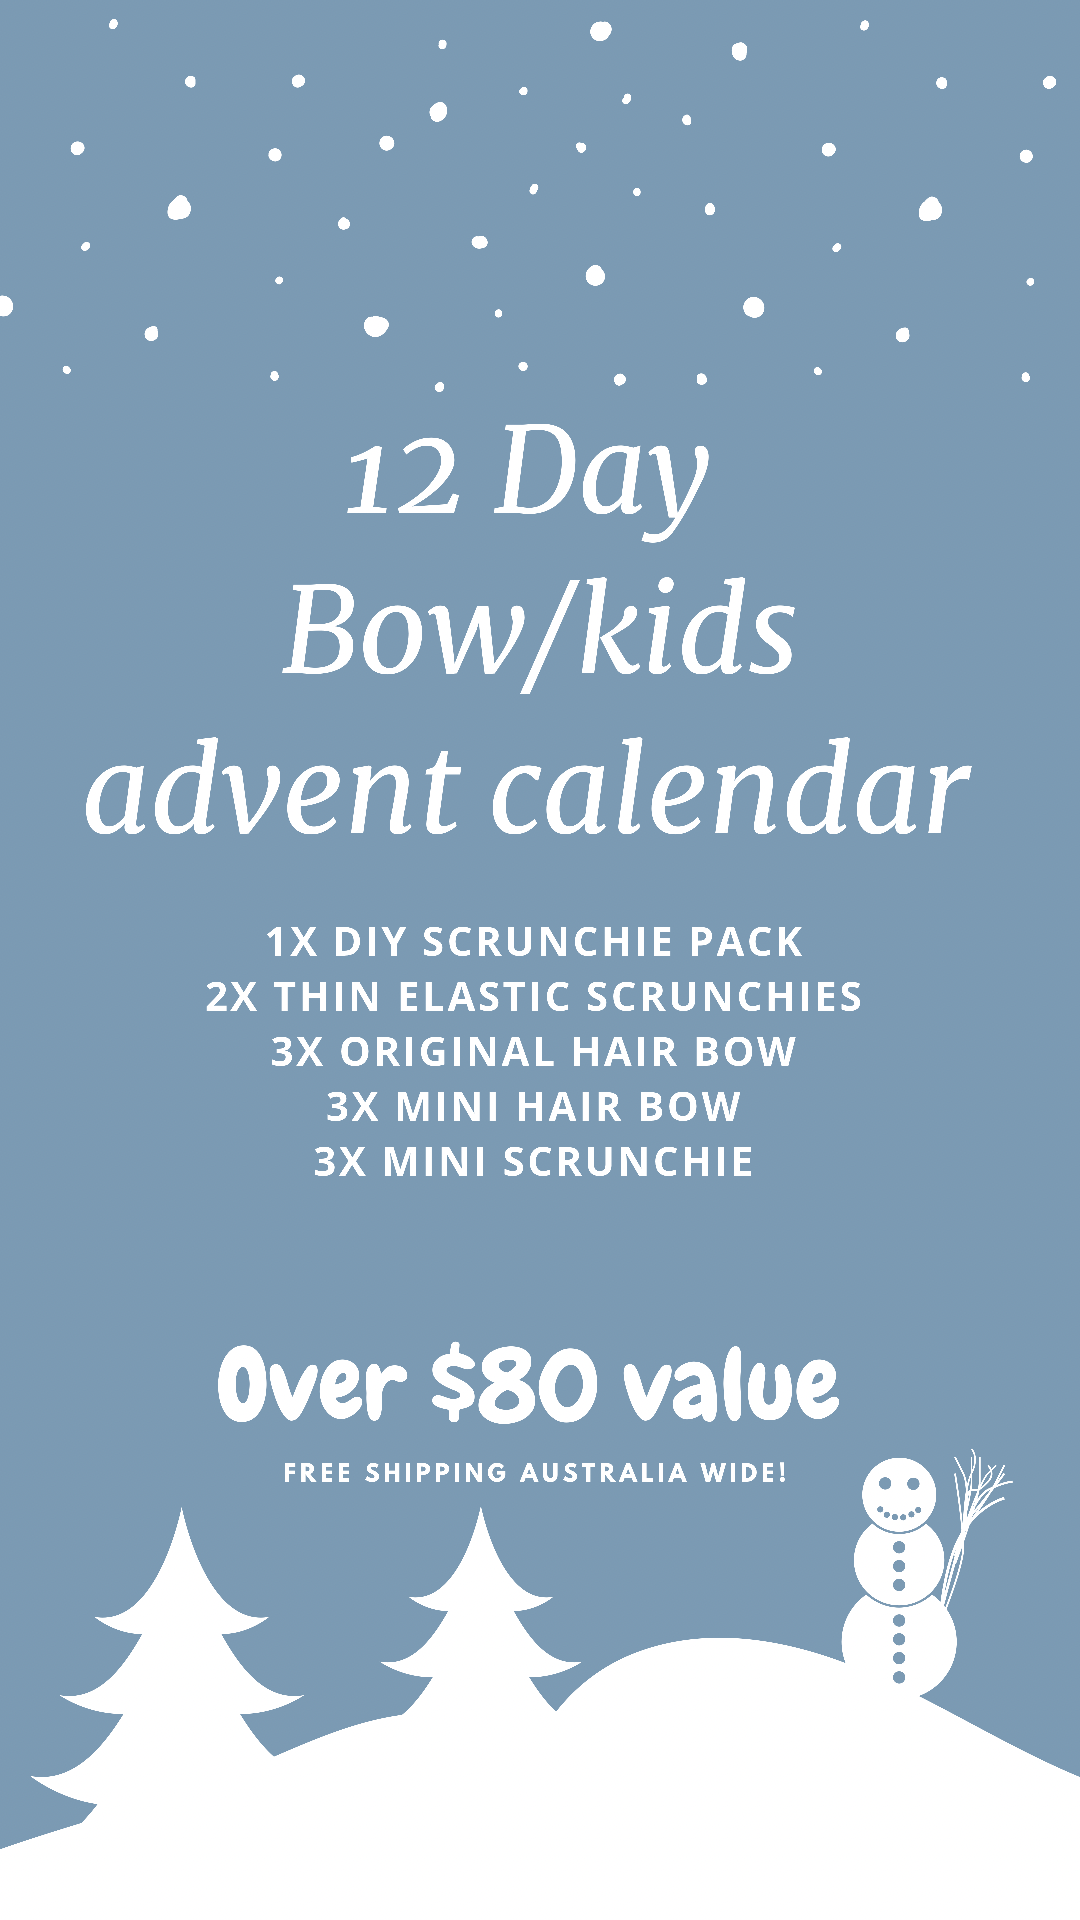 Bows/Kids Advent Calendar - 12 and 24 day